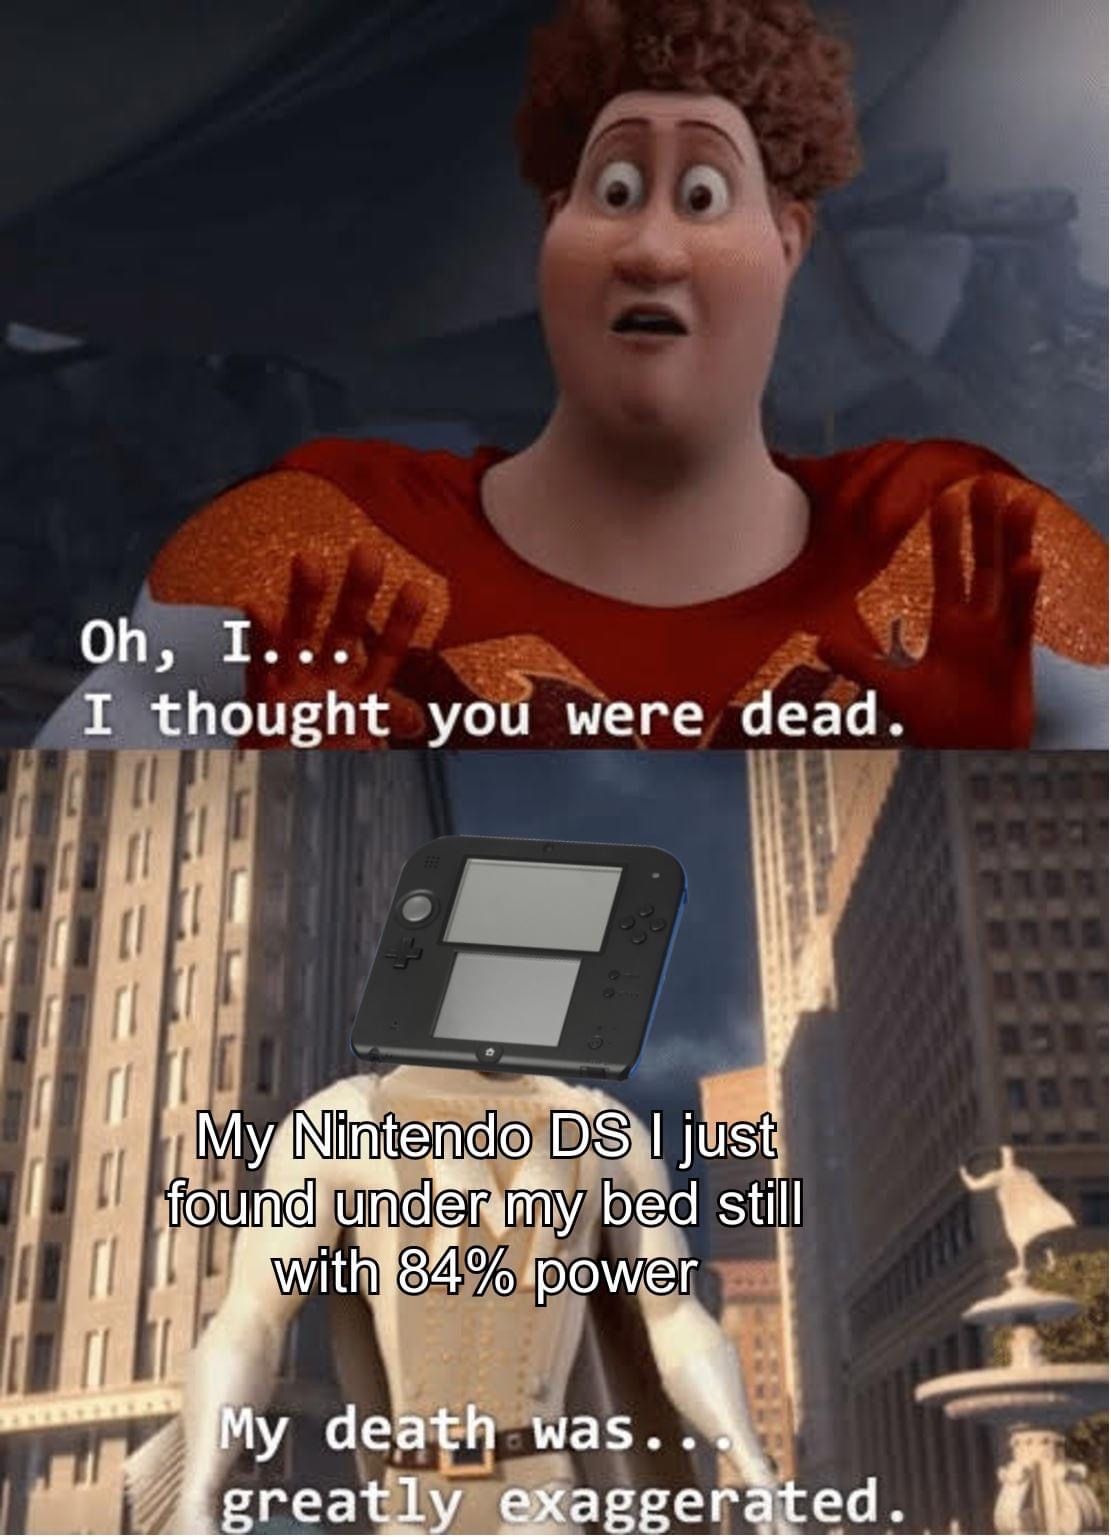 funny gaming memes - megamind meme - Oh, I... I thought you were dead. My Nintendo Ds I just found under my bed still with 84% power My death was.. greatly exaggerated.